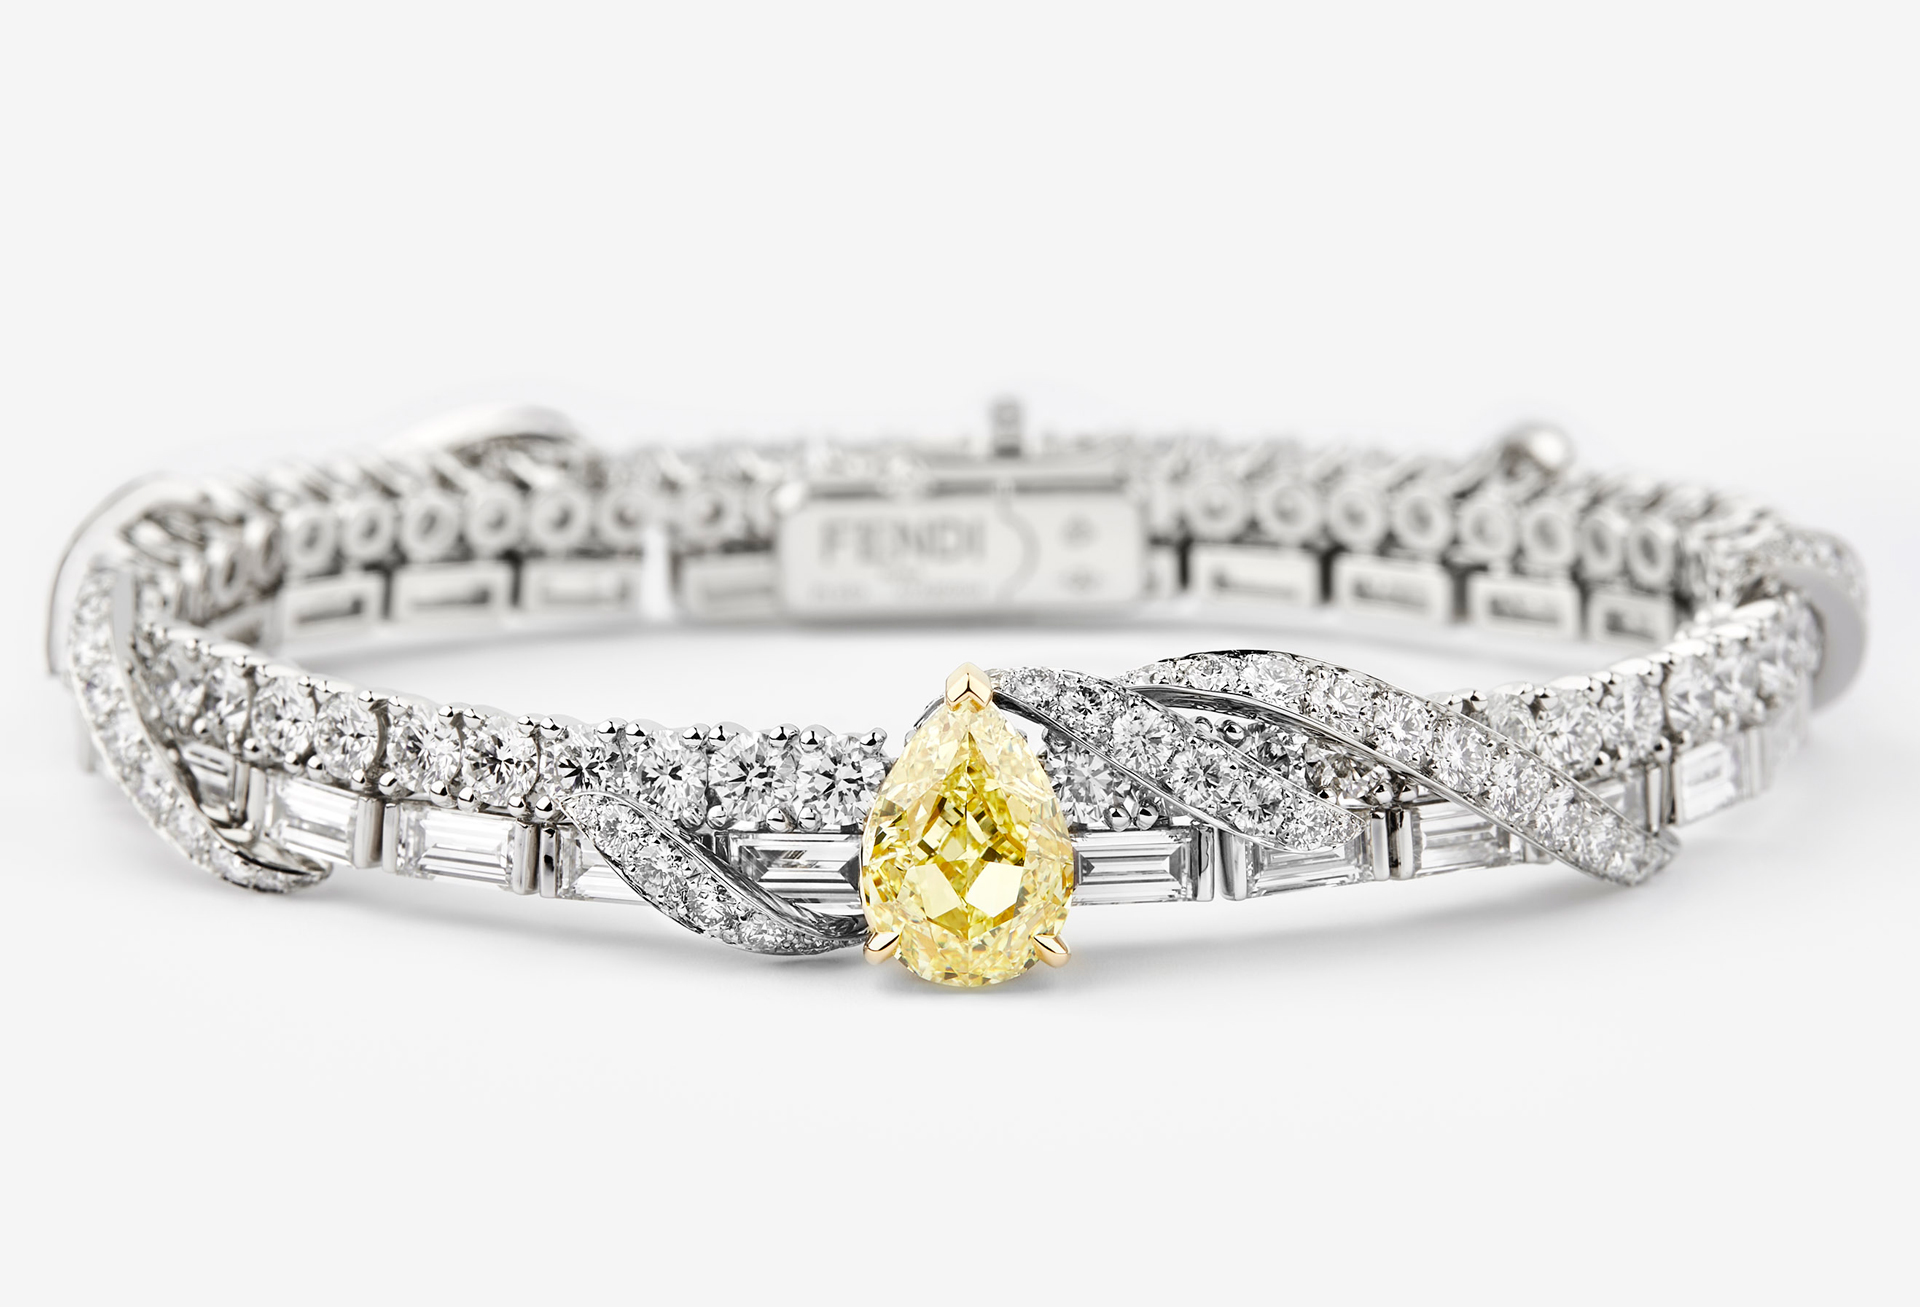 Louis Vuitton Idylle Blossom bracelets in pink, yellow and white gold with  diamond highlights.